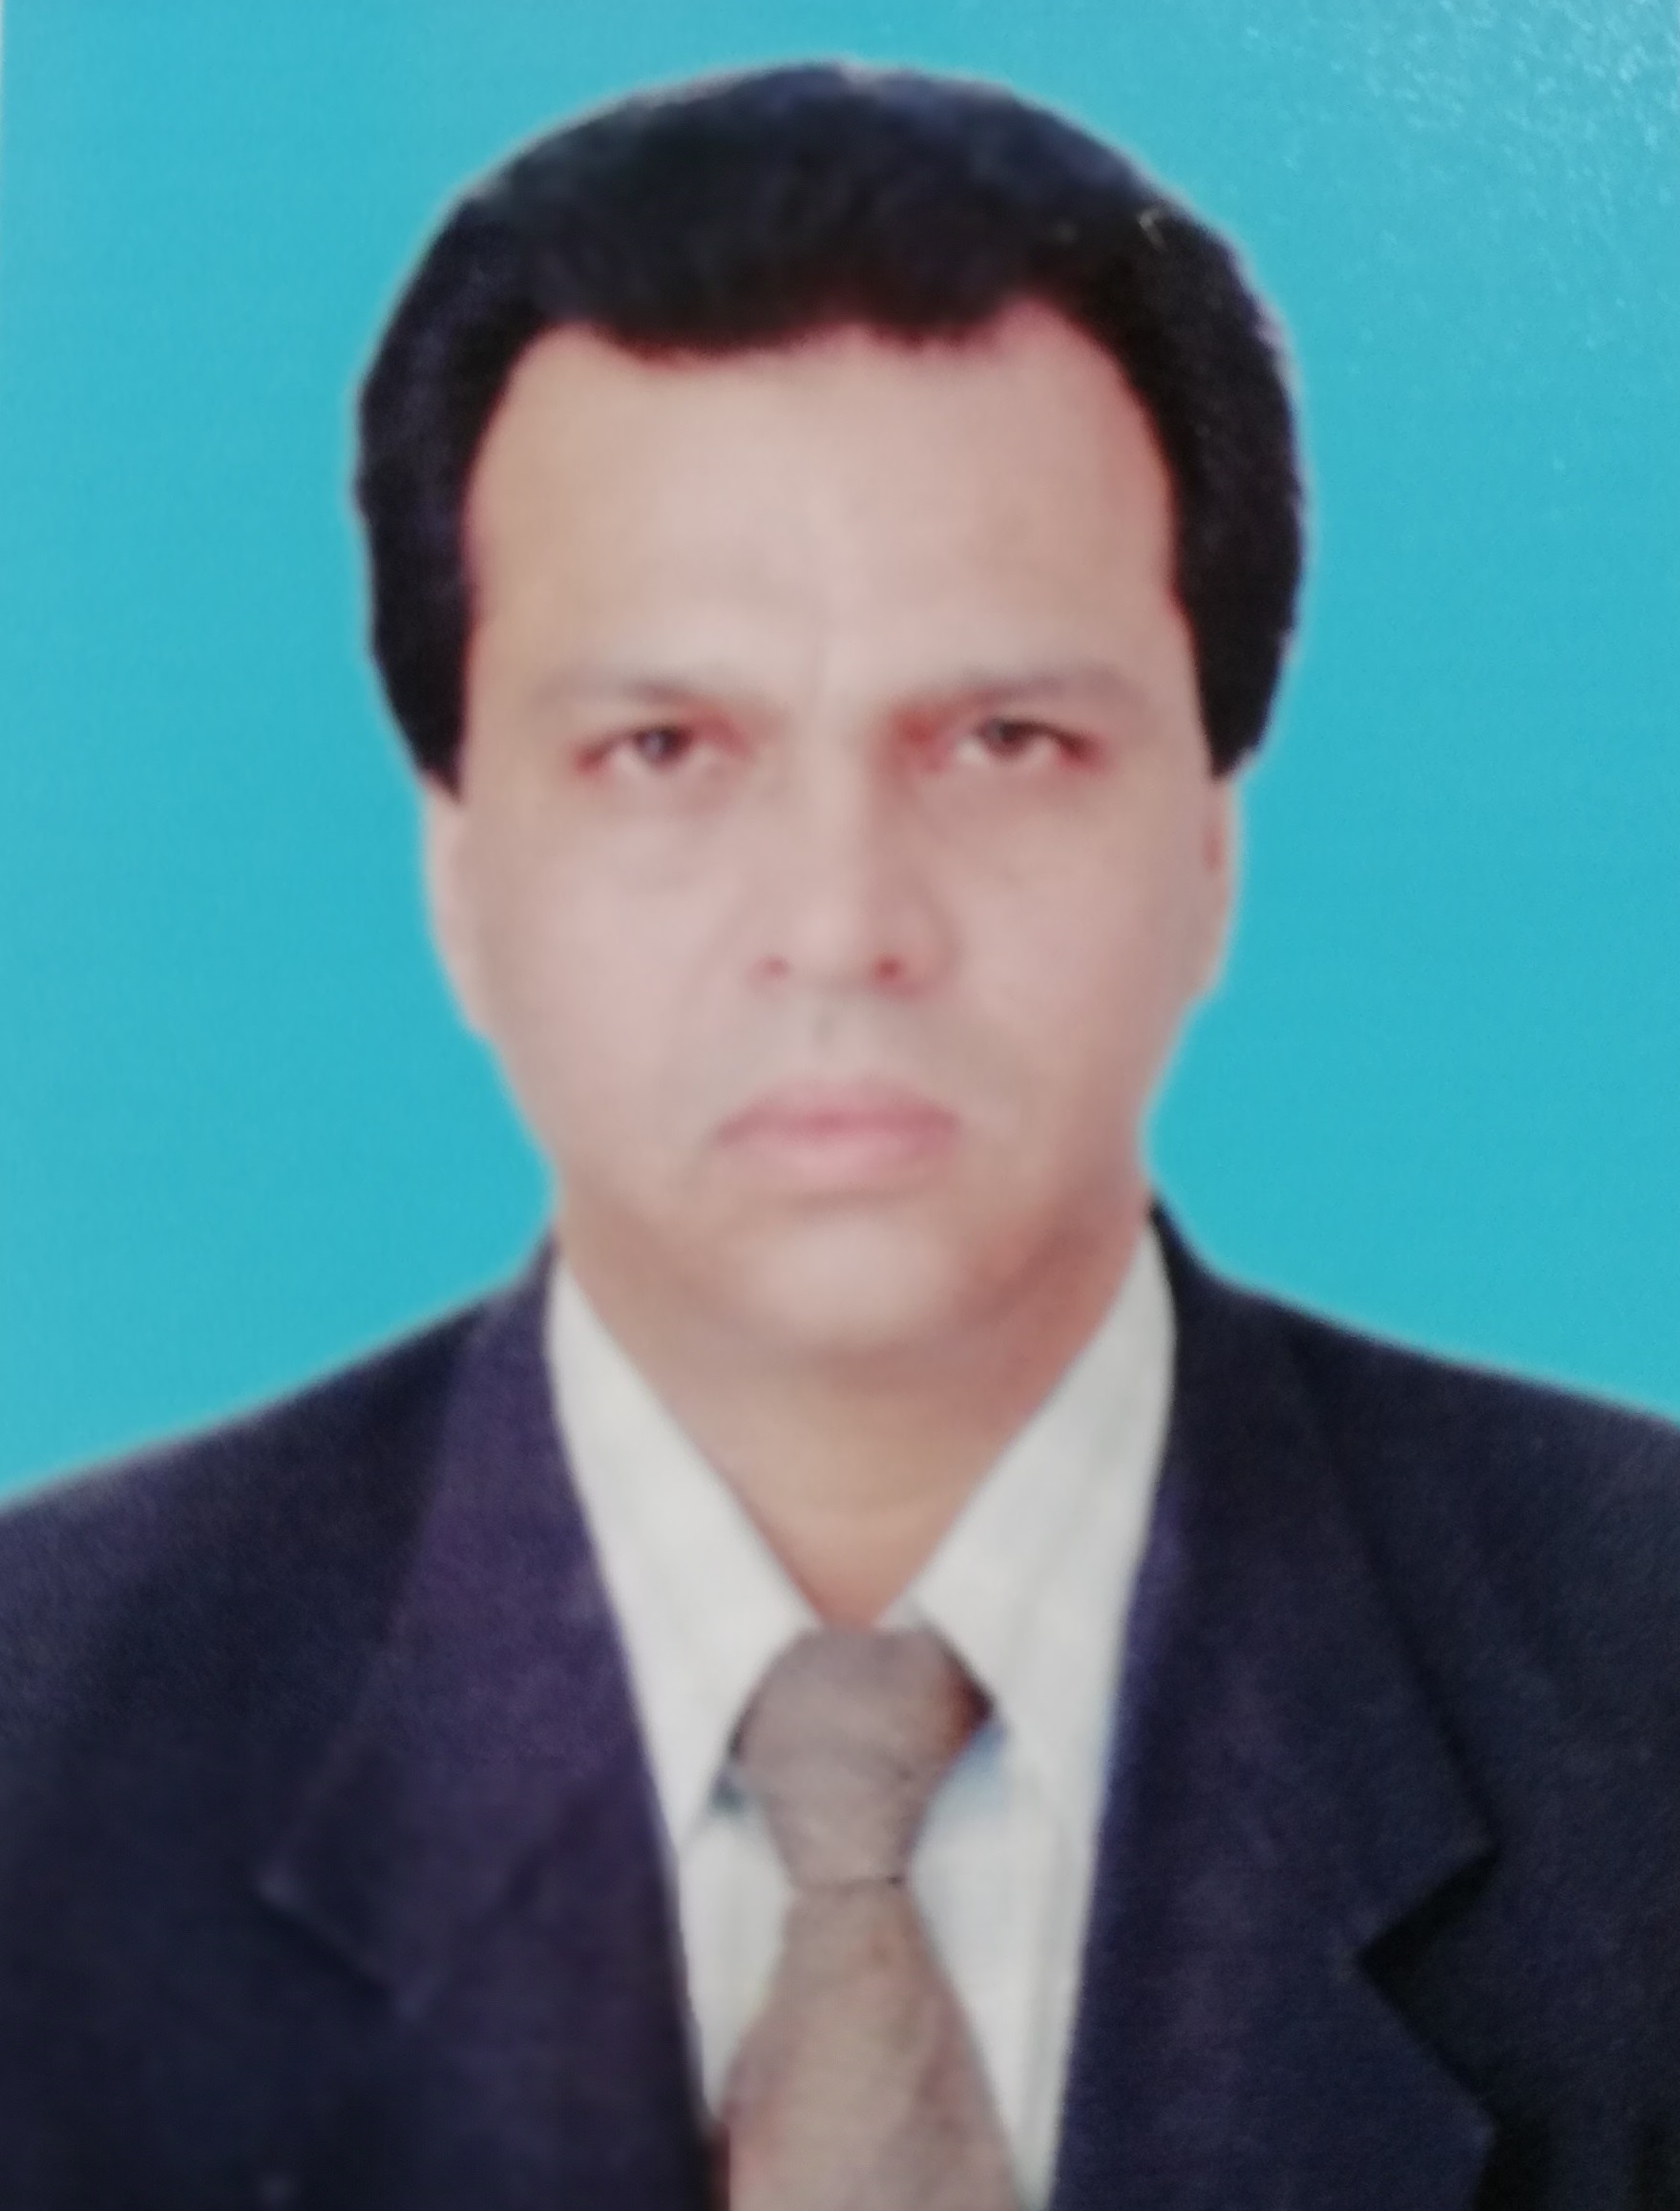 Profile Picture of Muhammad Asad Majeed